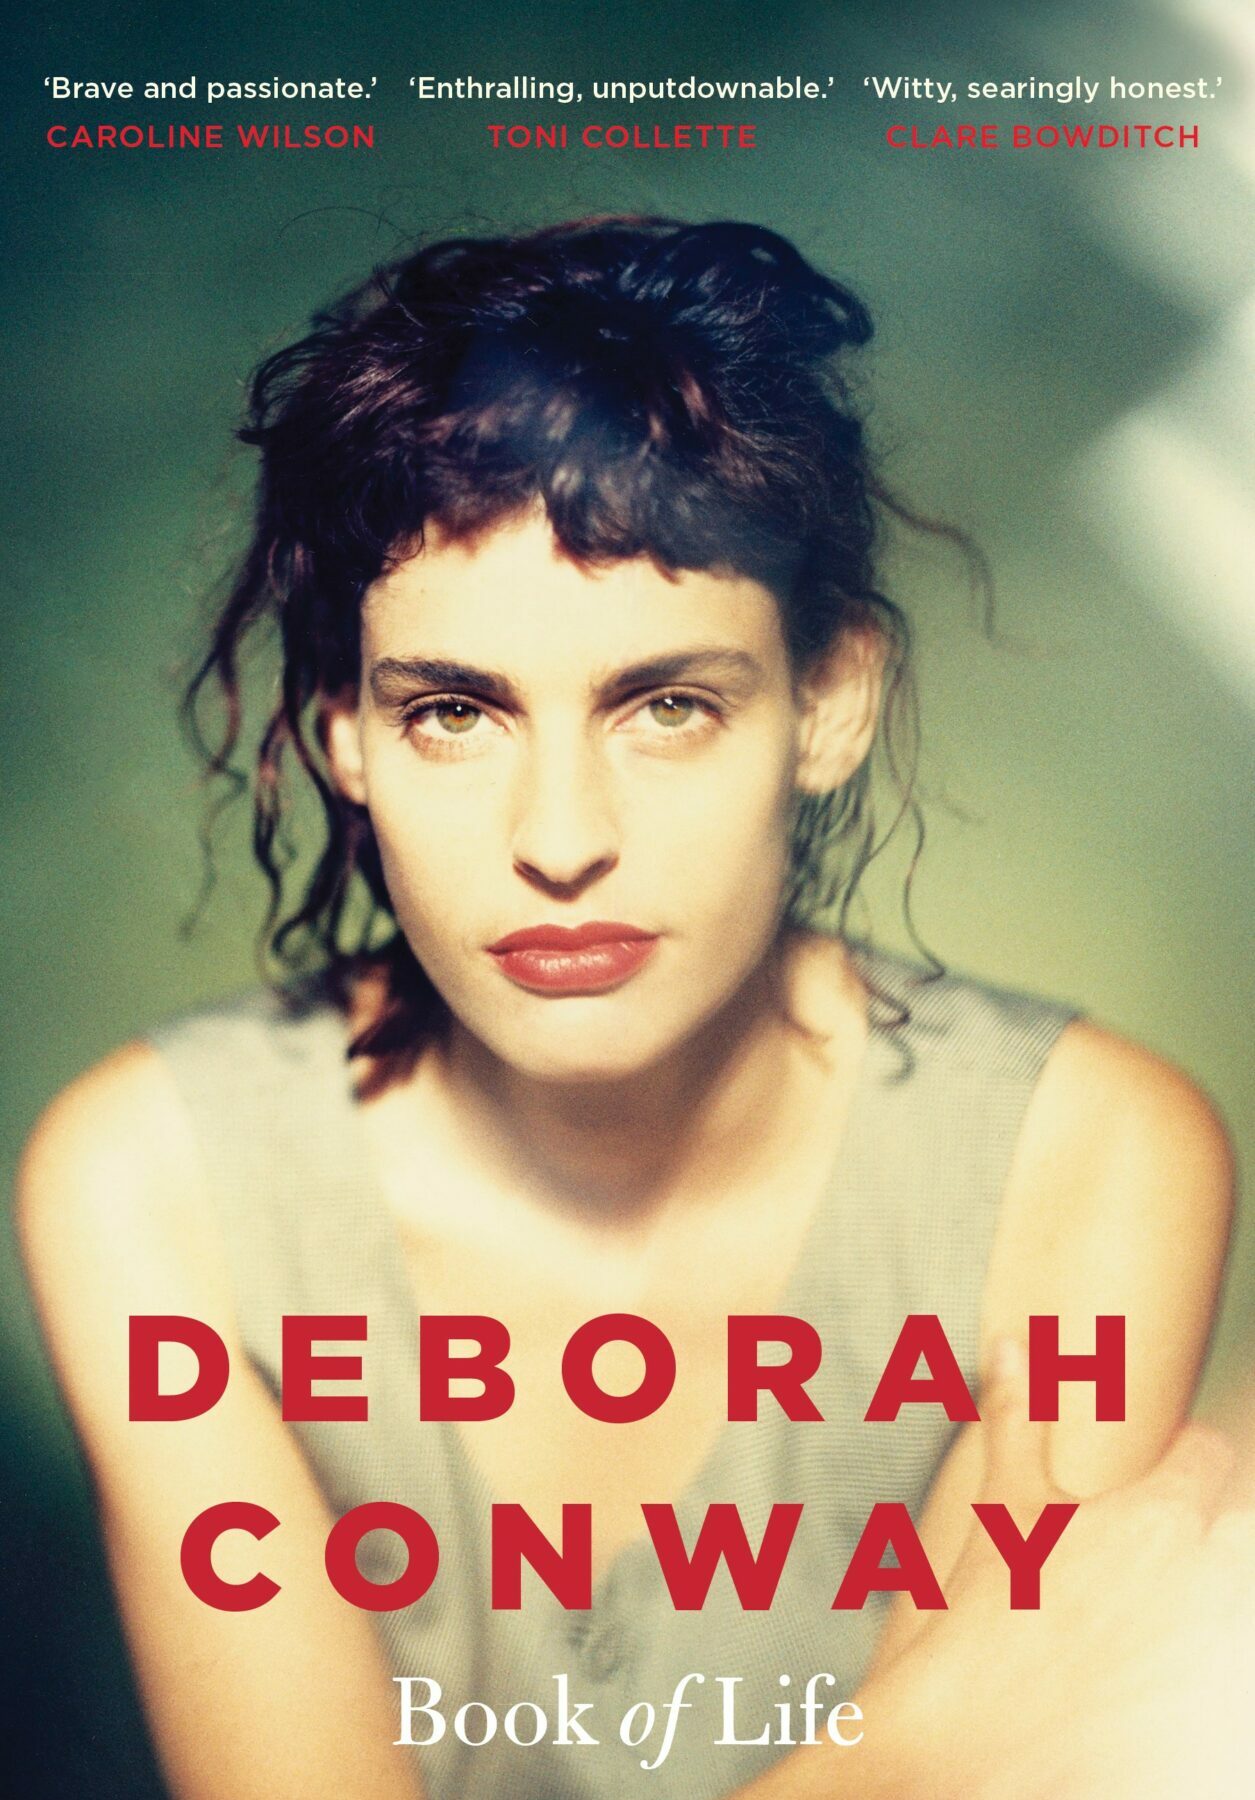 A book cover featuring a woman with black hair in a messy bun, leaning forward and looking serious, with the authors name in red block letters and the title in white underneath